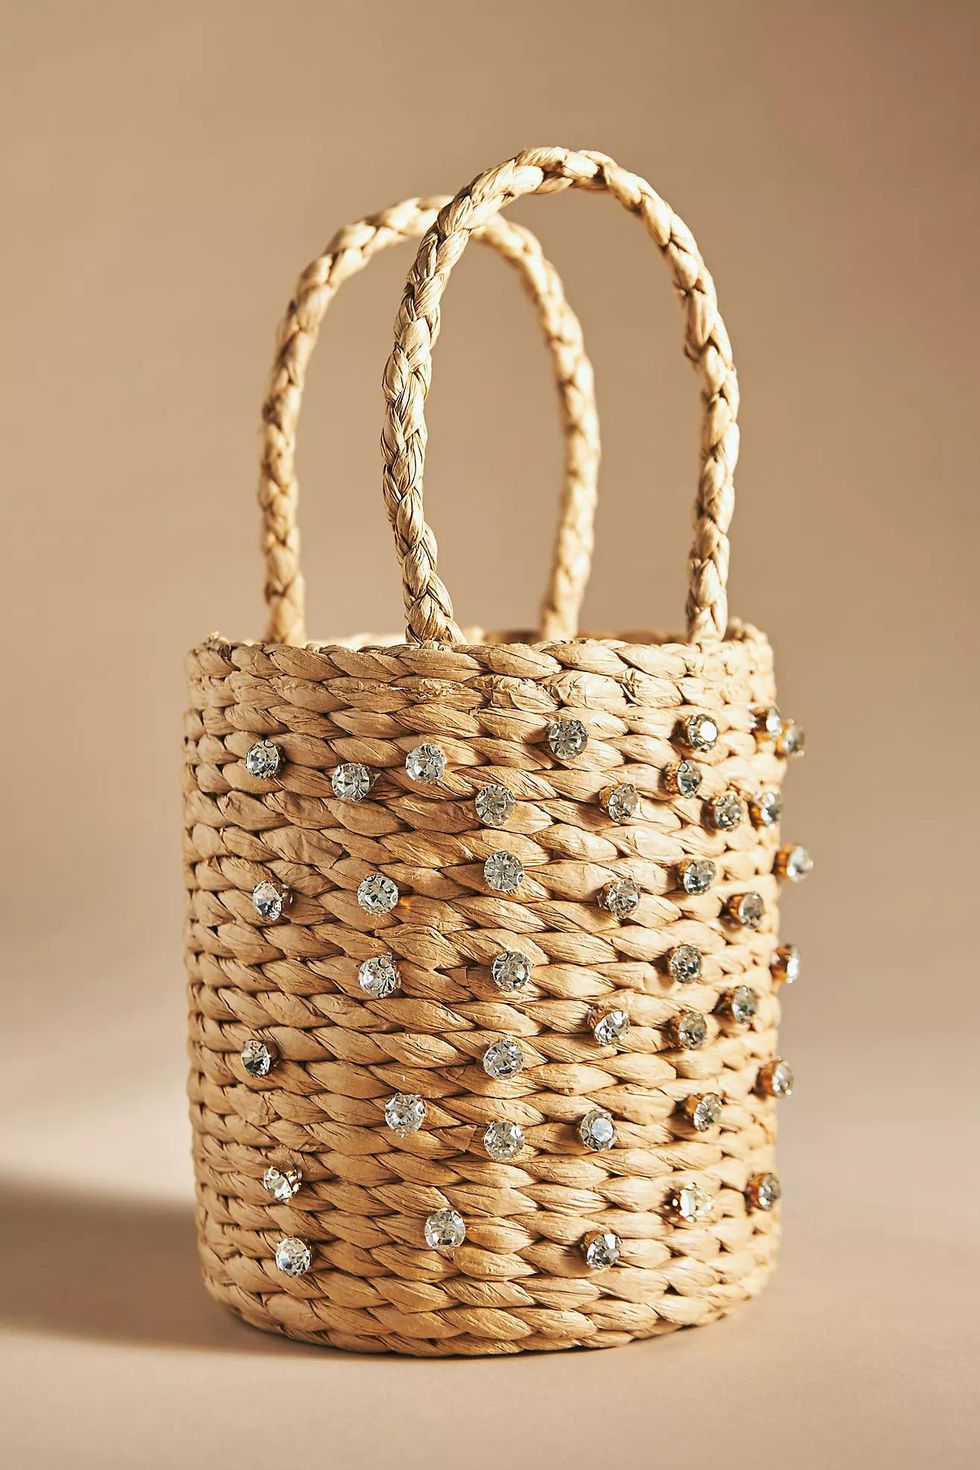 15 Best Straw Bags 2023 - Cutest Round Beach Bags for Summer